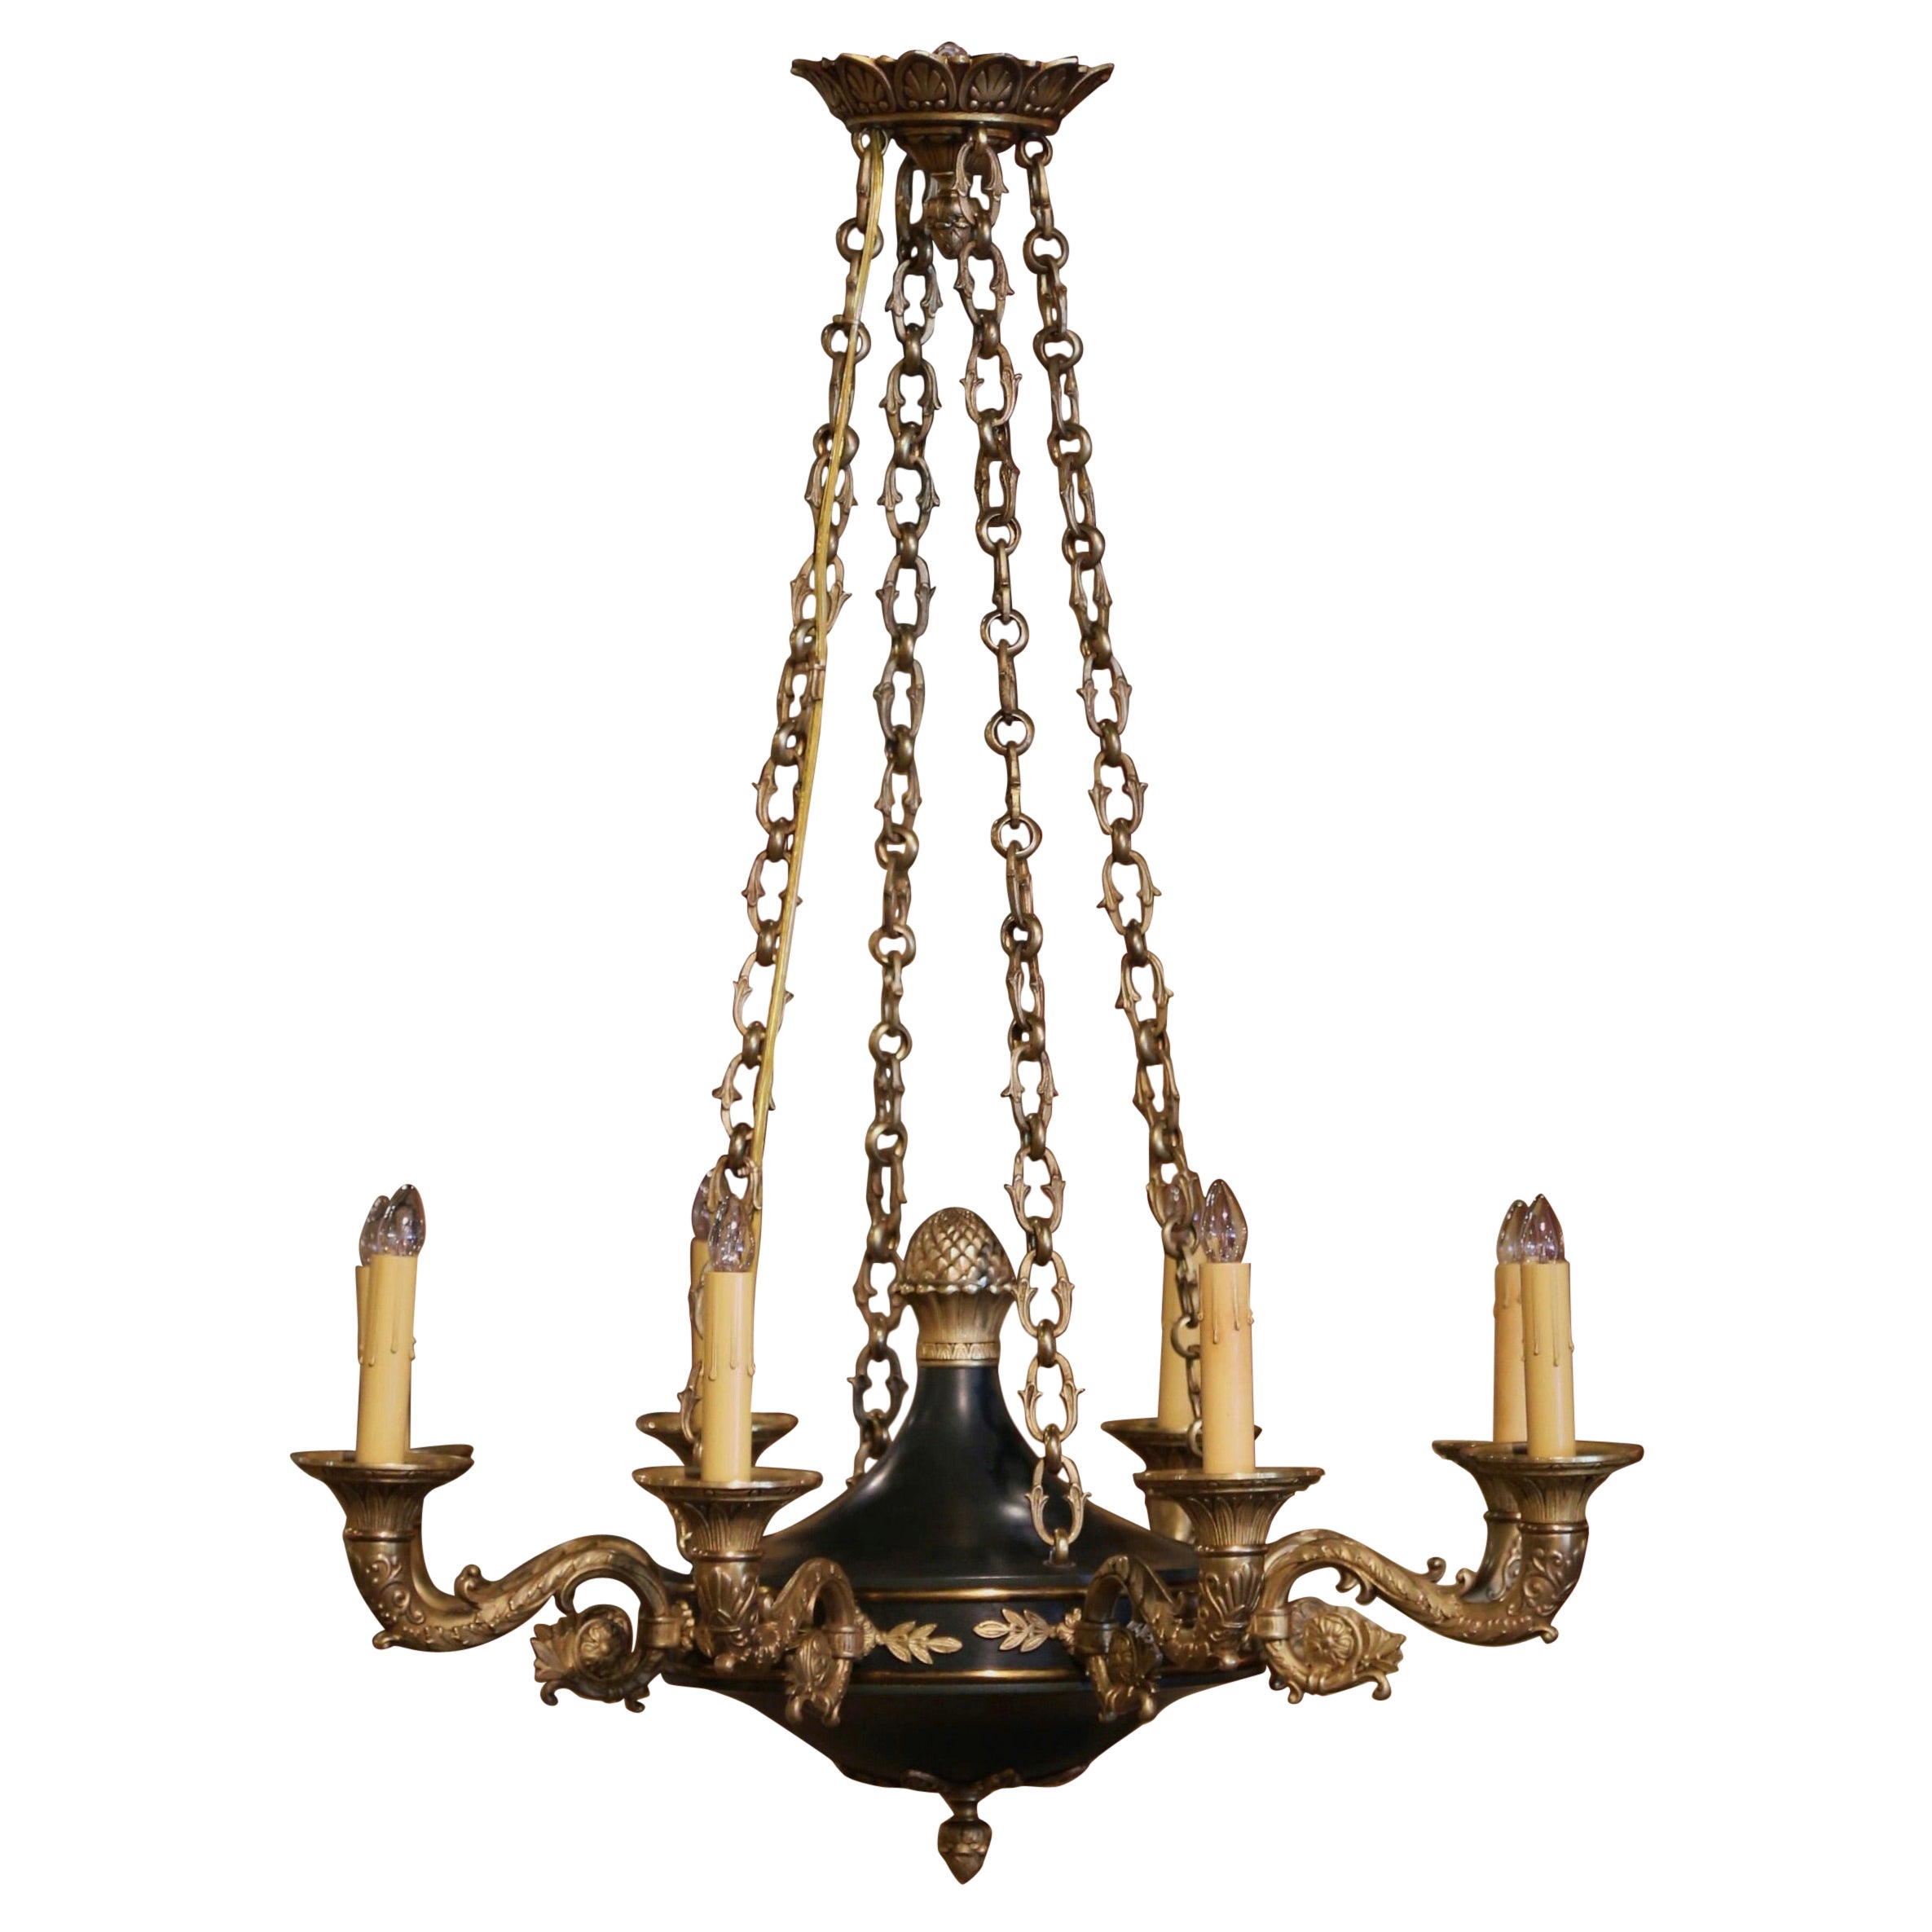 Early 20th Century French Empire Bronze Dore Eight-Light Chandelier